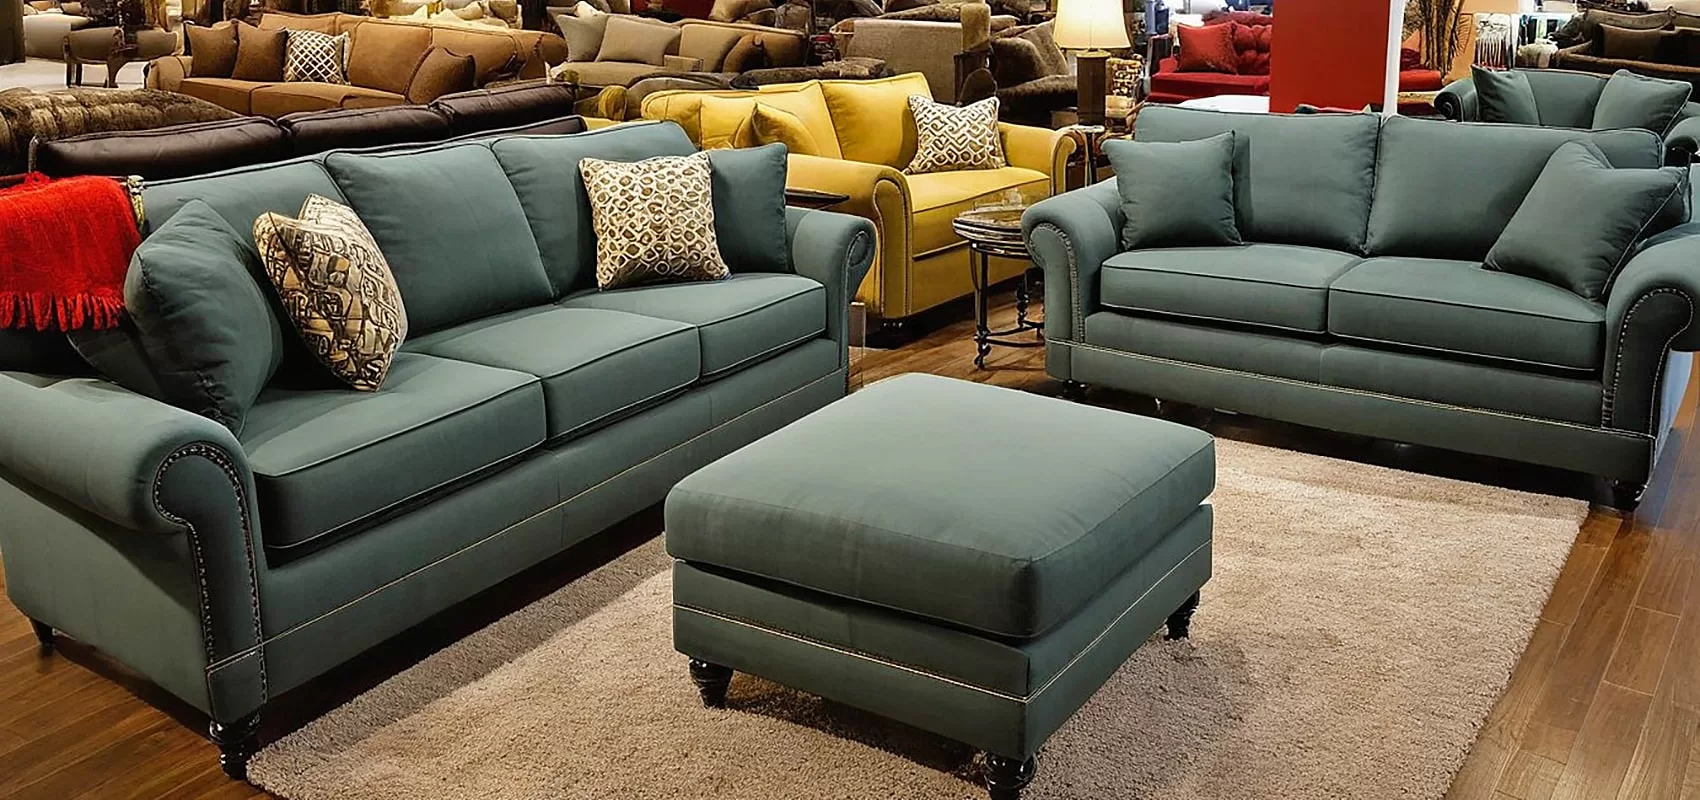 Best Couch Stores Feature Min Jpg.webp